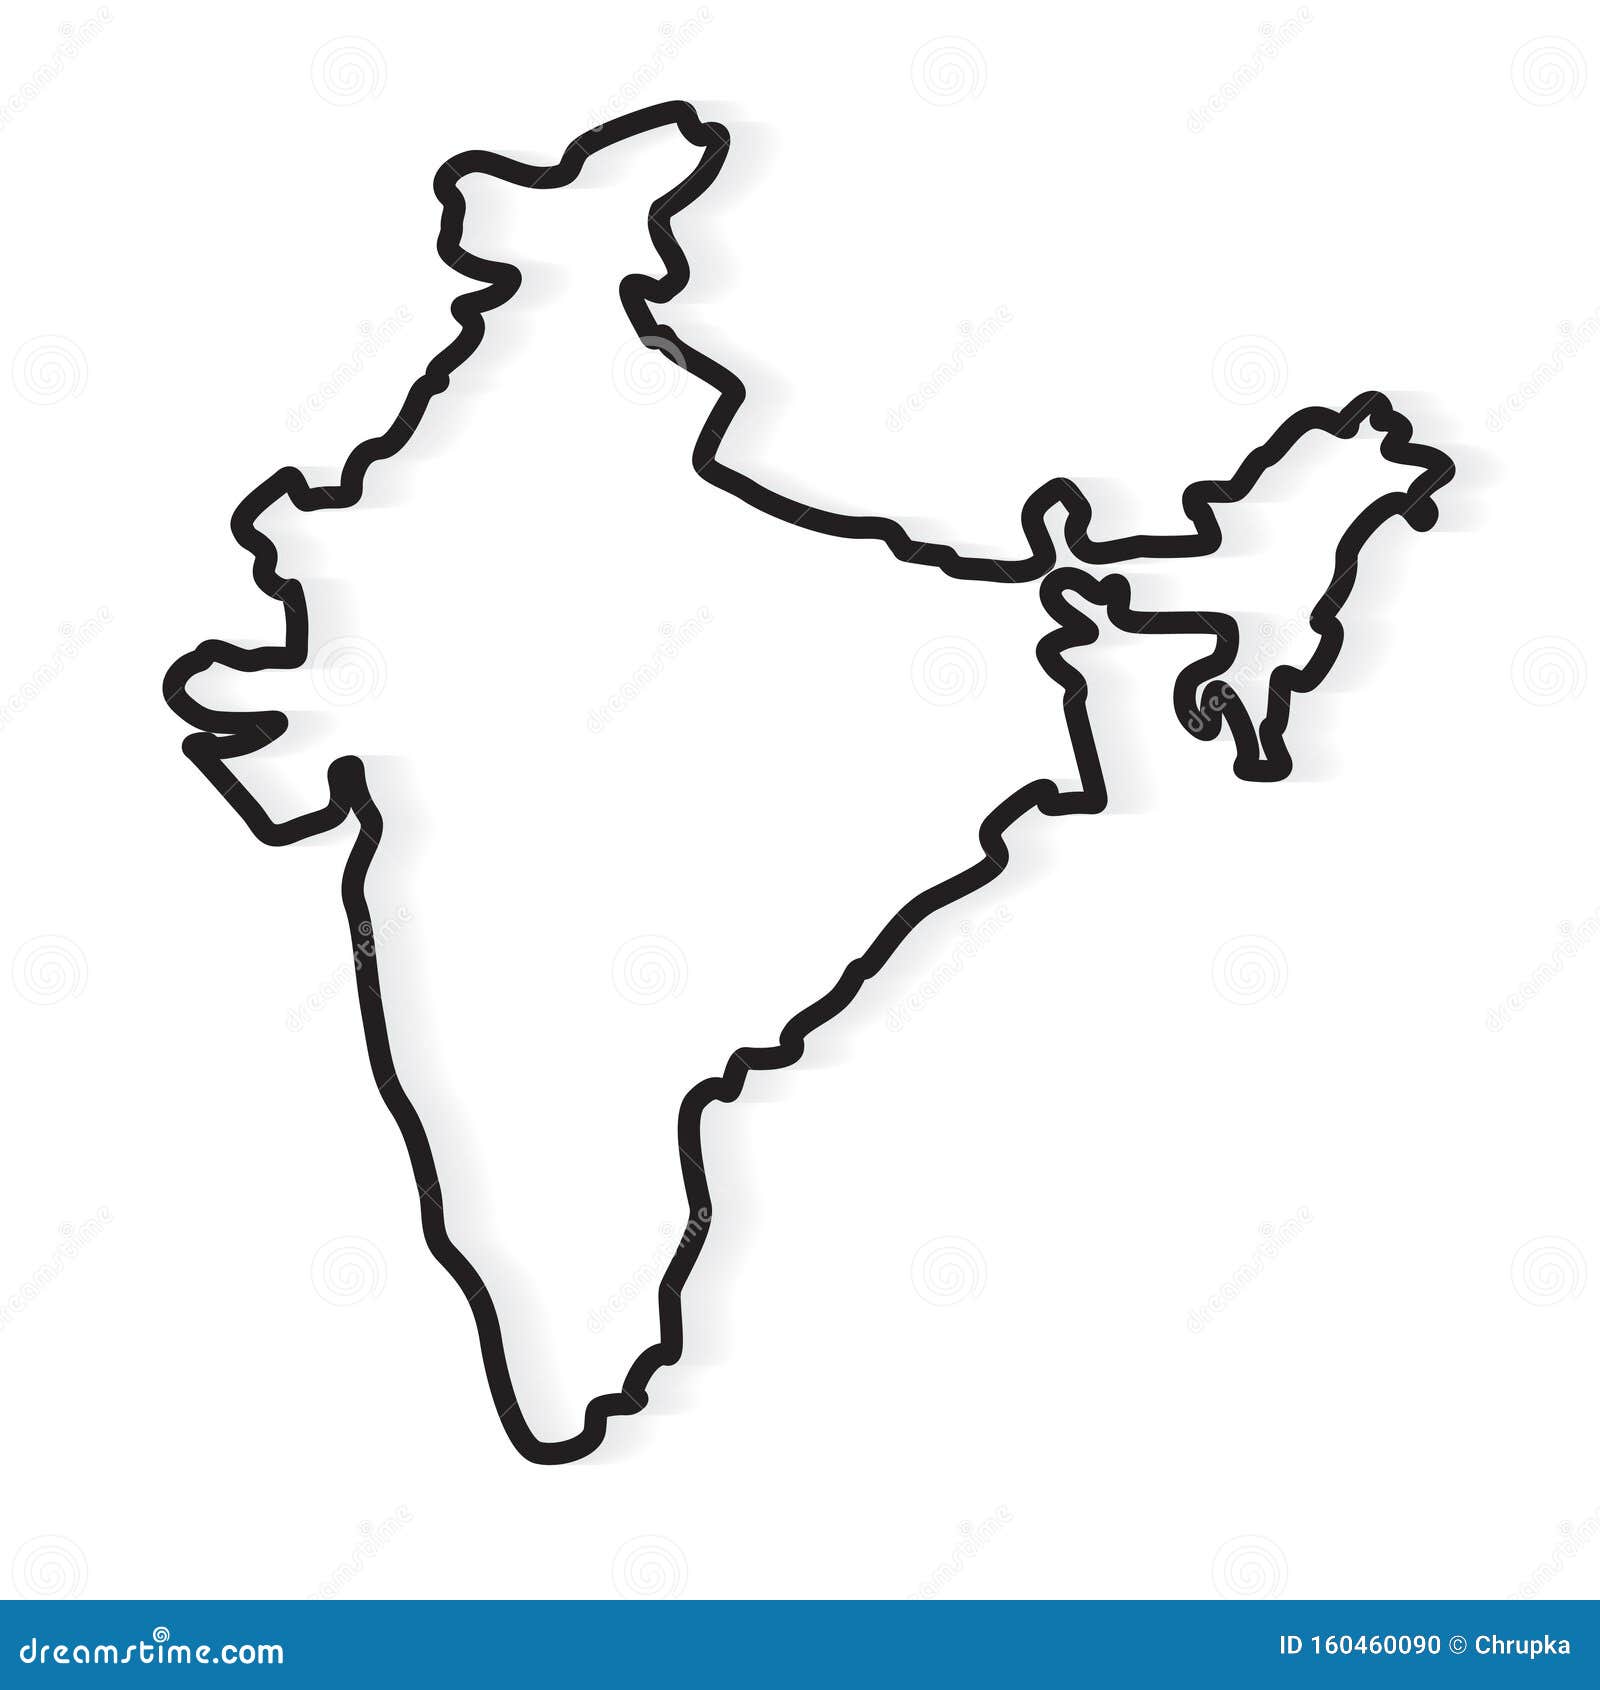 India Map Outline Printable free image download